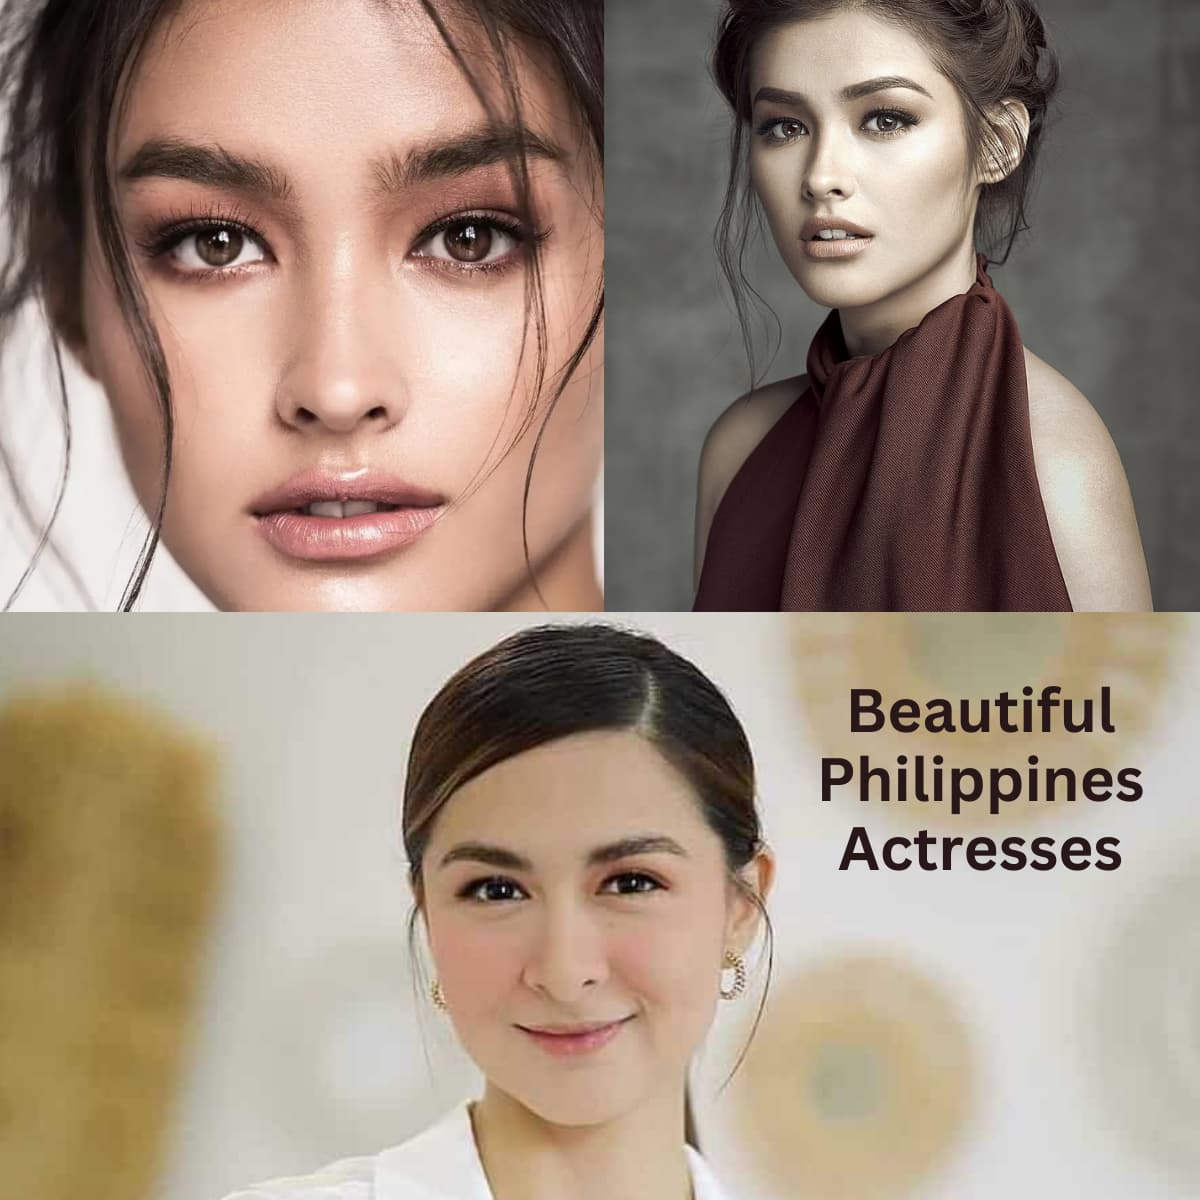 Philippines Actresses, Beautiful Philippines Actresses, Actresses